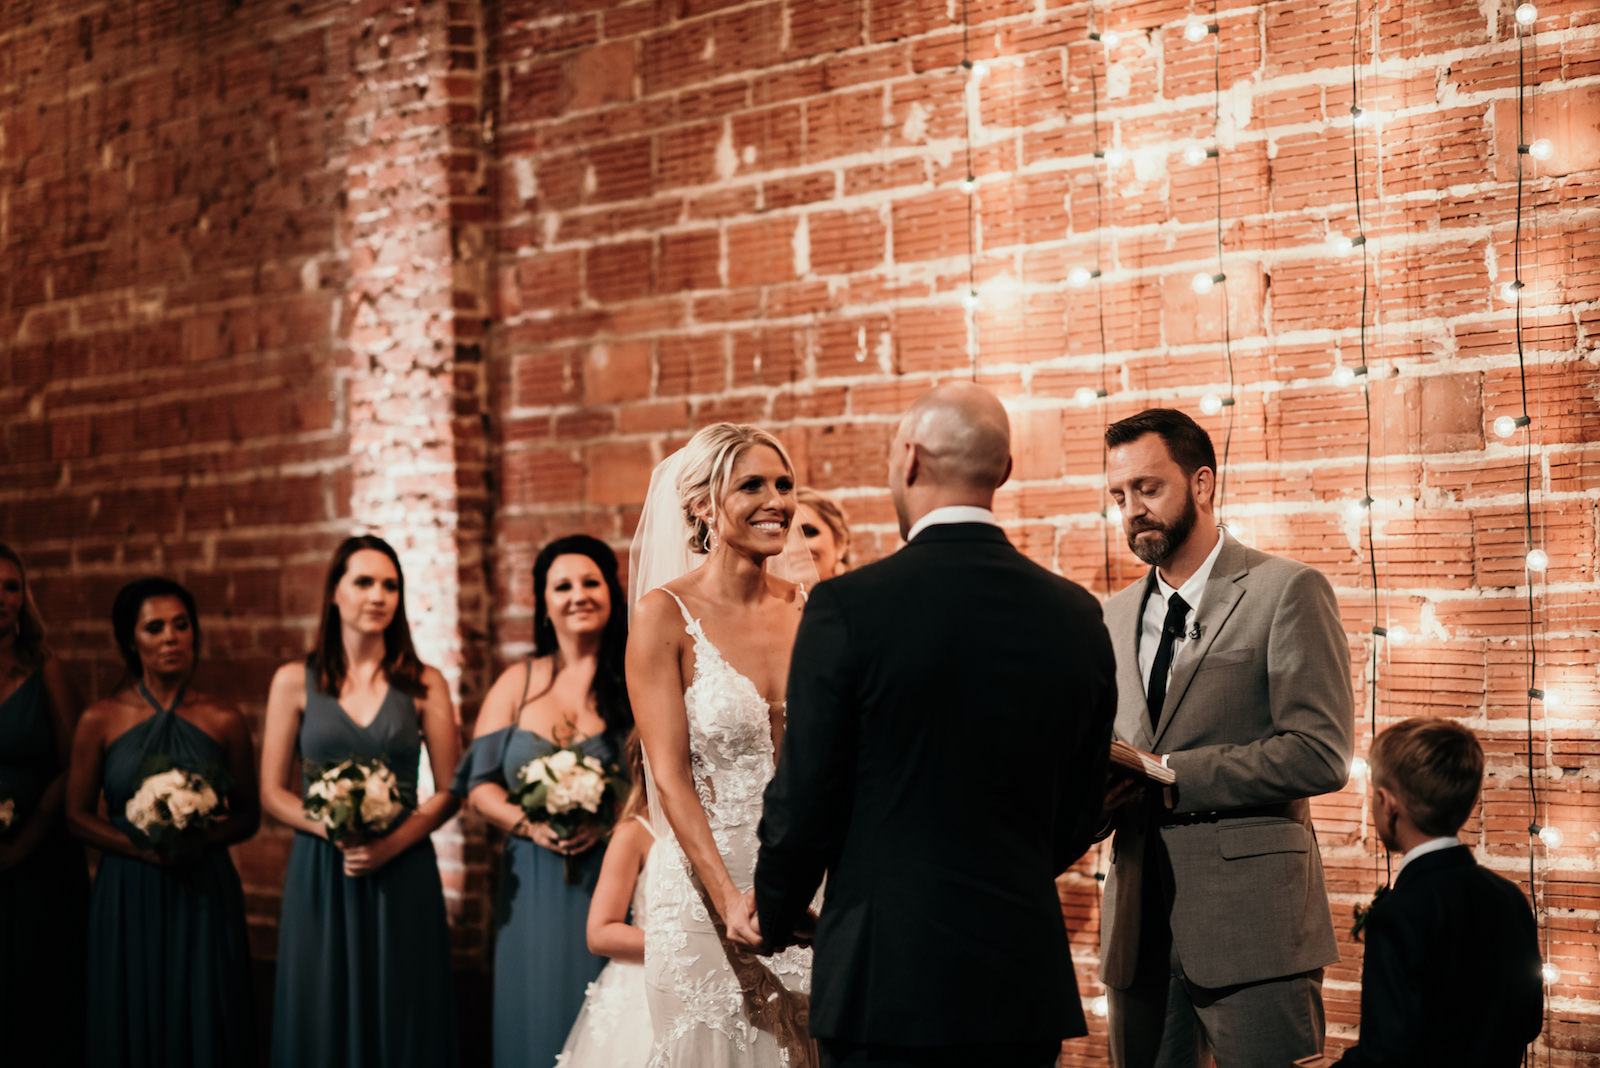 Florida Bride and Groom Exchange Vows During Wedding Ceremony, Interior Summer Ceremony with Exposed Red Brick Wall and String Lighting | Historic Tampa Bay Industrial Wedding Venue NOVA 535 in Downtown St. Petersburg